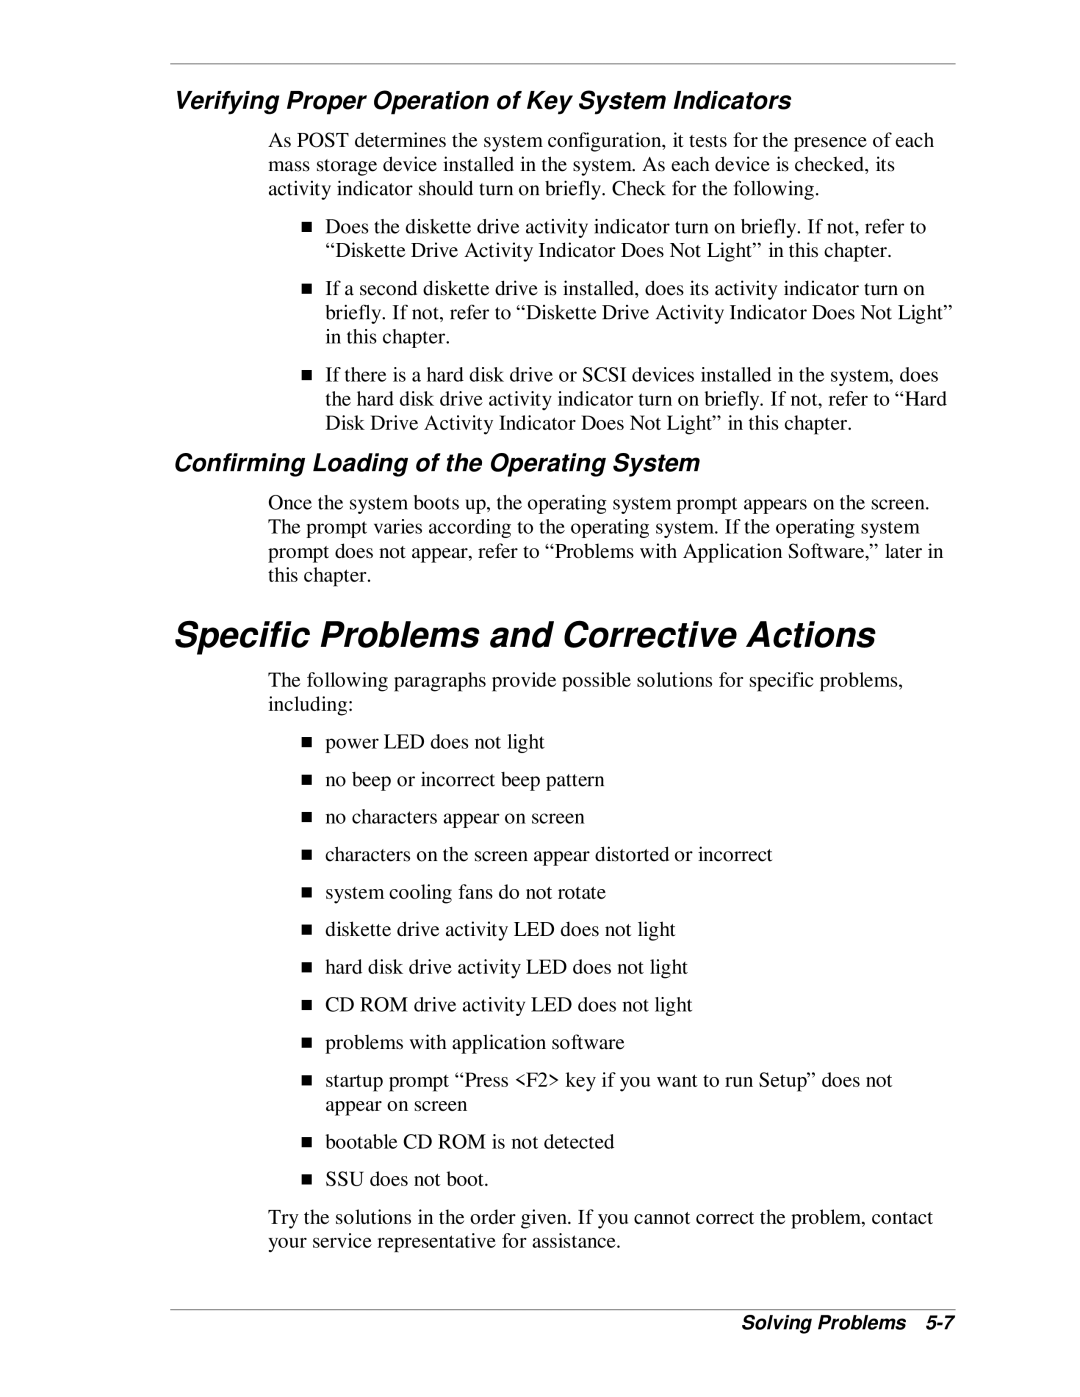 NEC MH4500 manual Specific Problems and Corrective Actions, Confirming Loading of the Operating System 